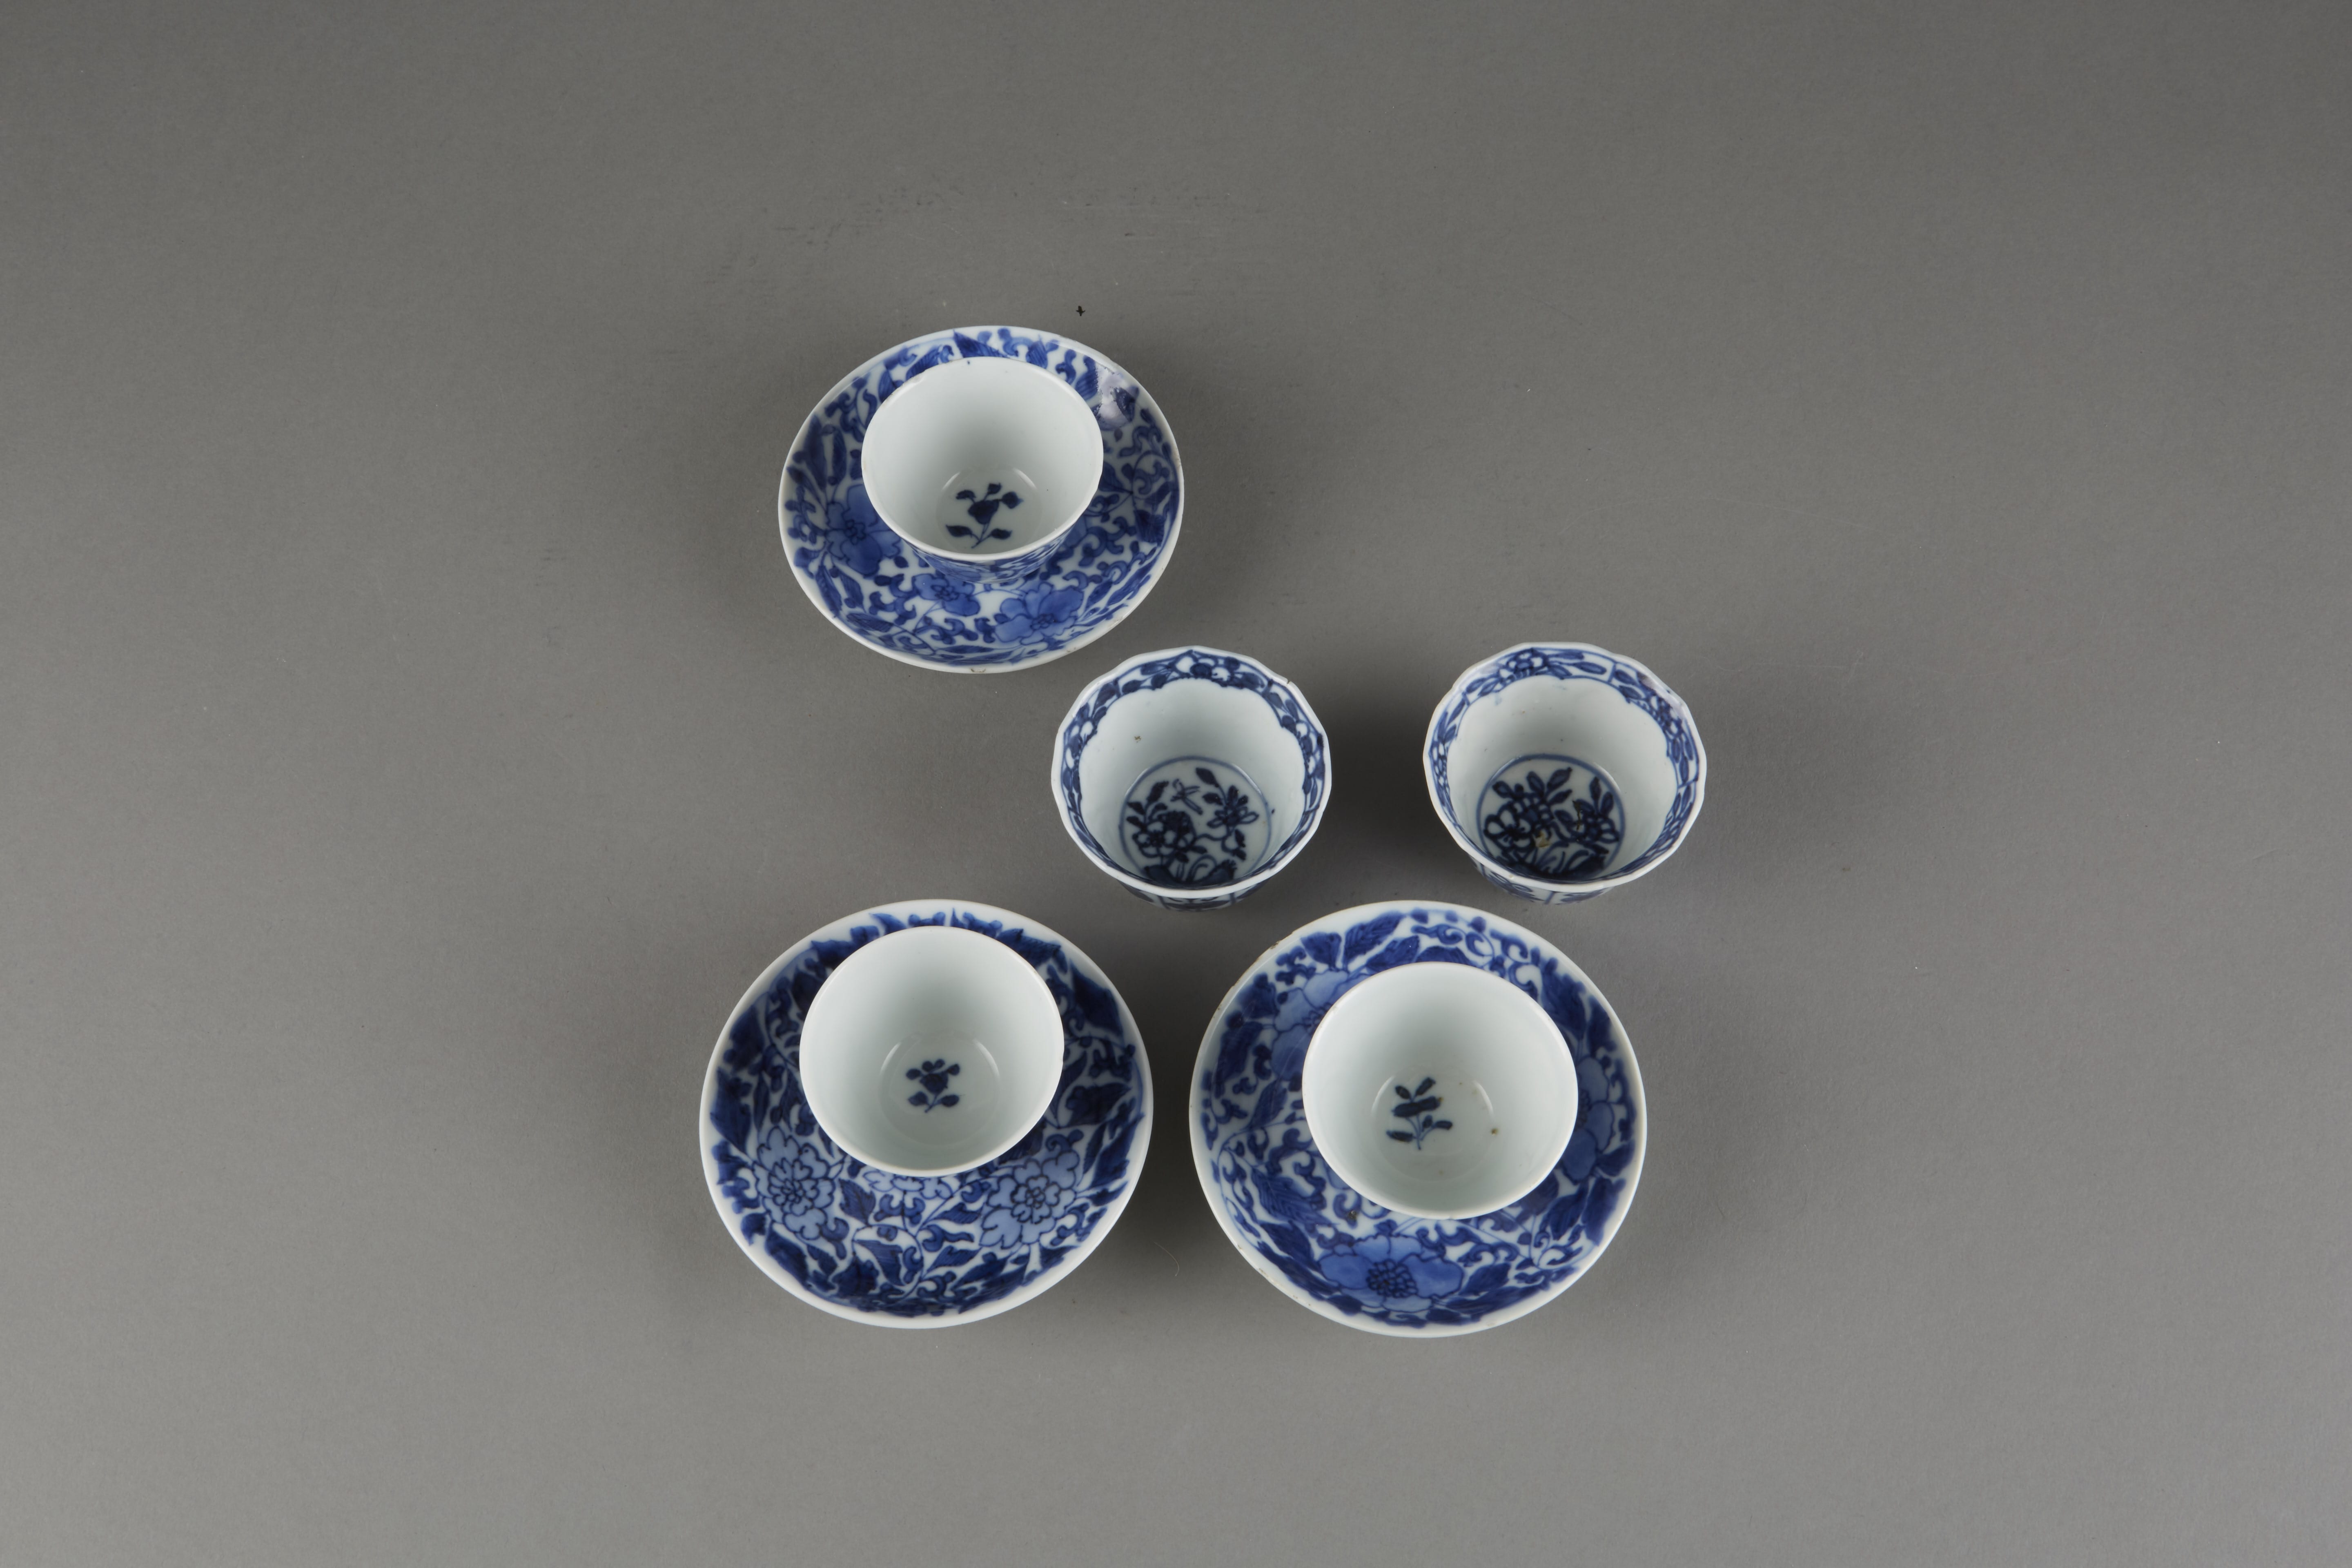 Lot 089: Chinese 18th Century Kangxi Blue and White Export Porcelain Set of Three Cups and Saucers and Two Cups